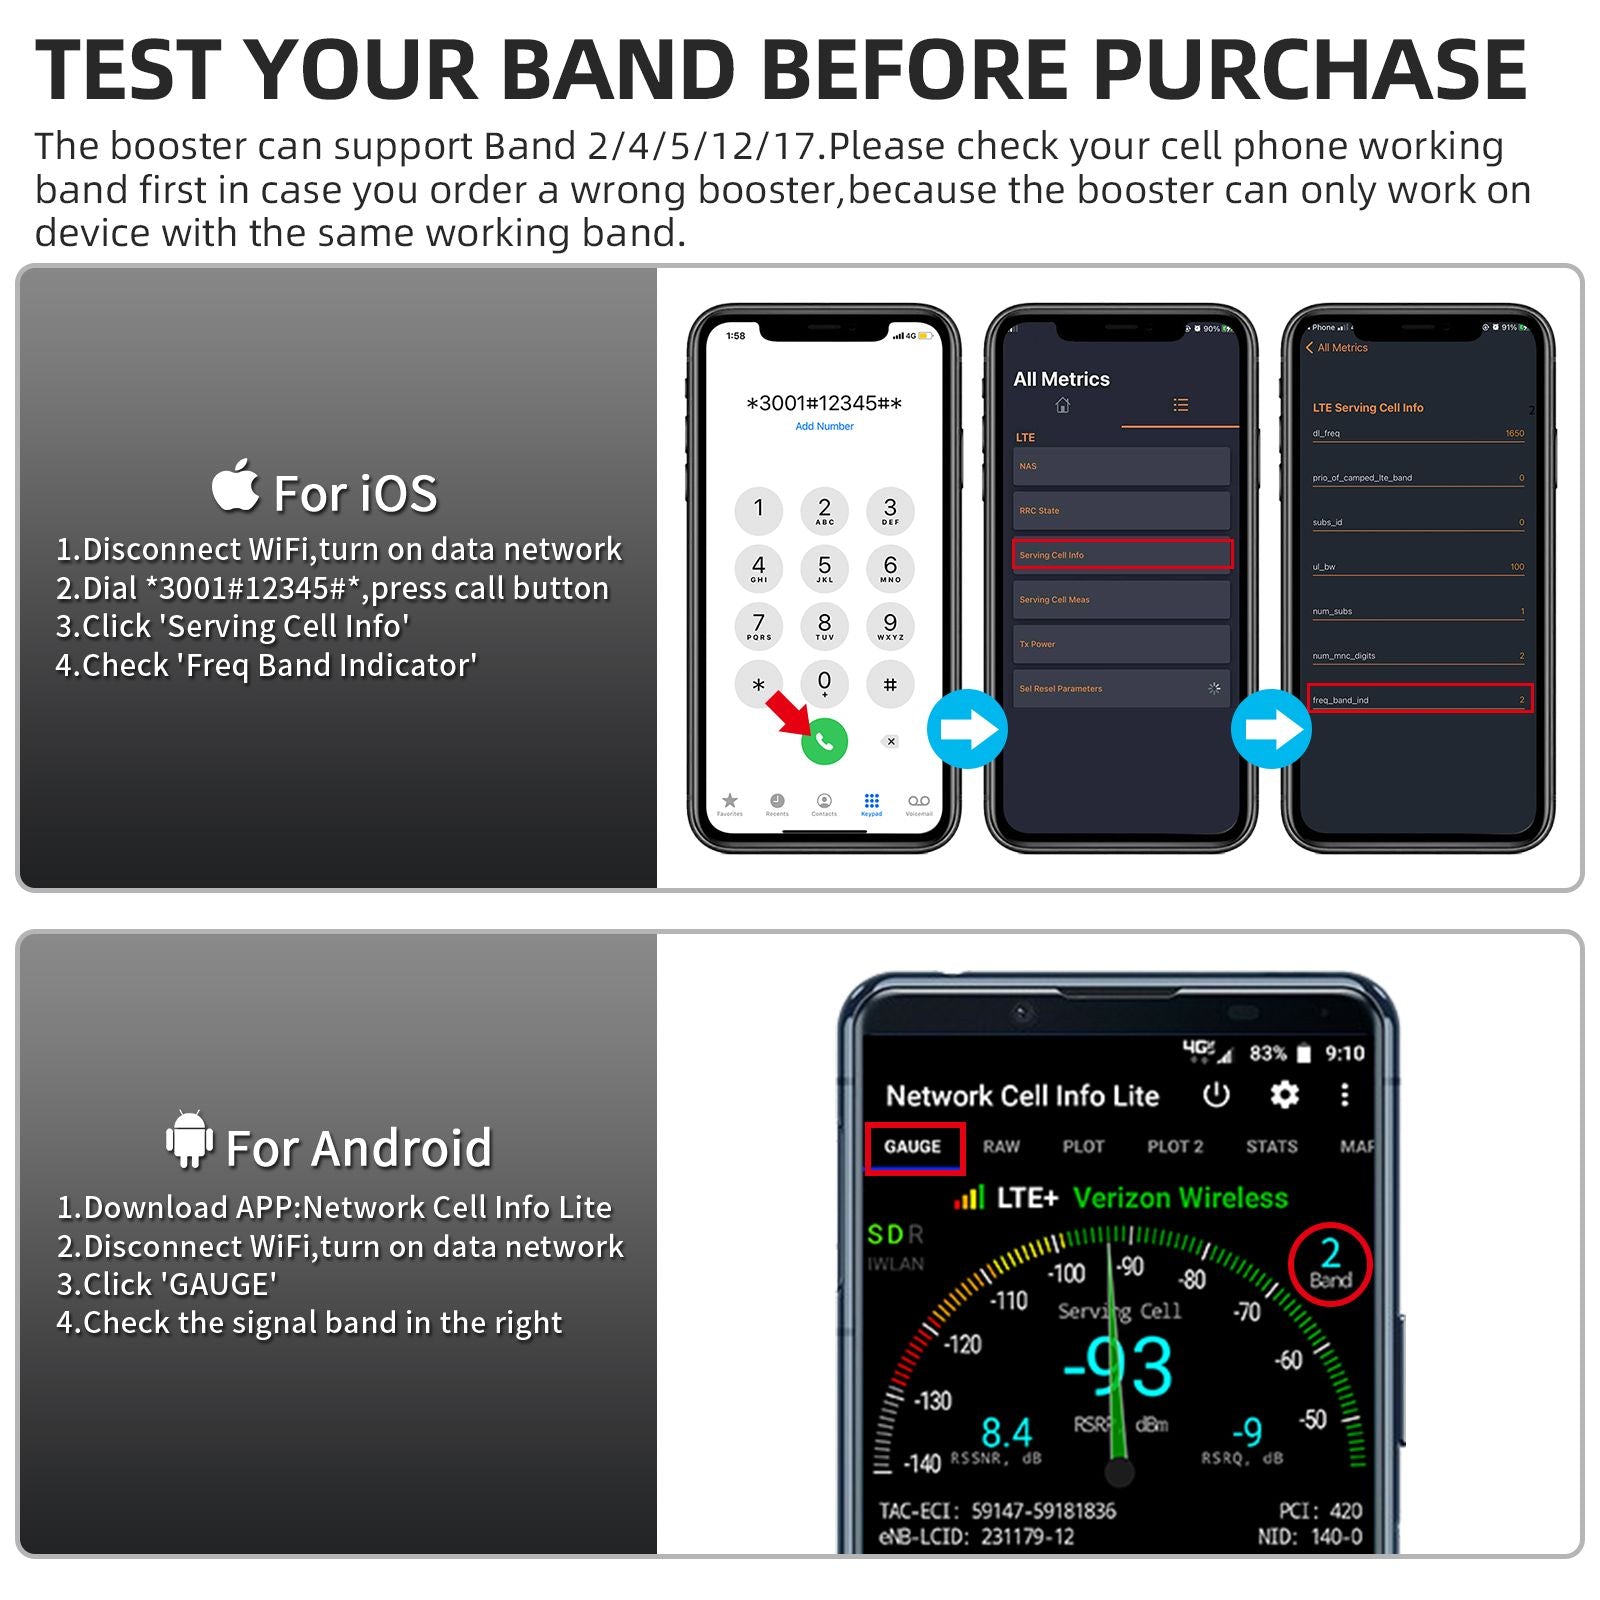 How to Test the Frequency Band